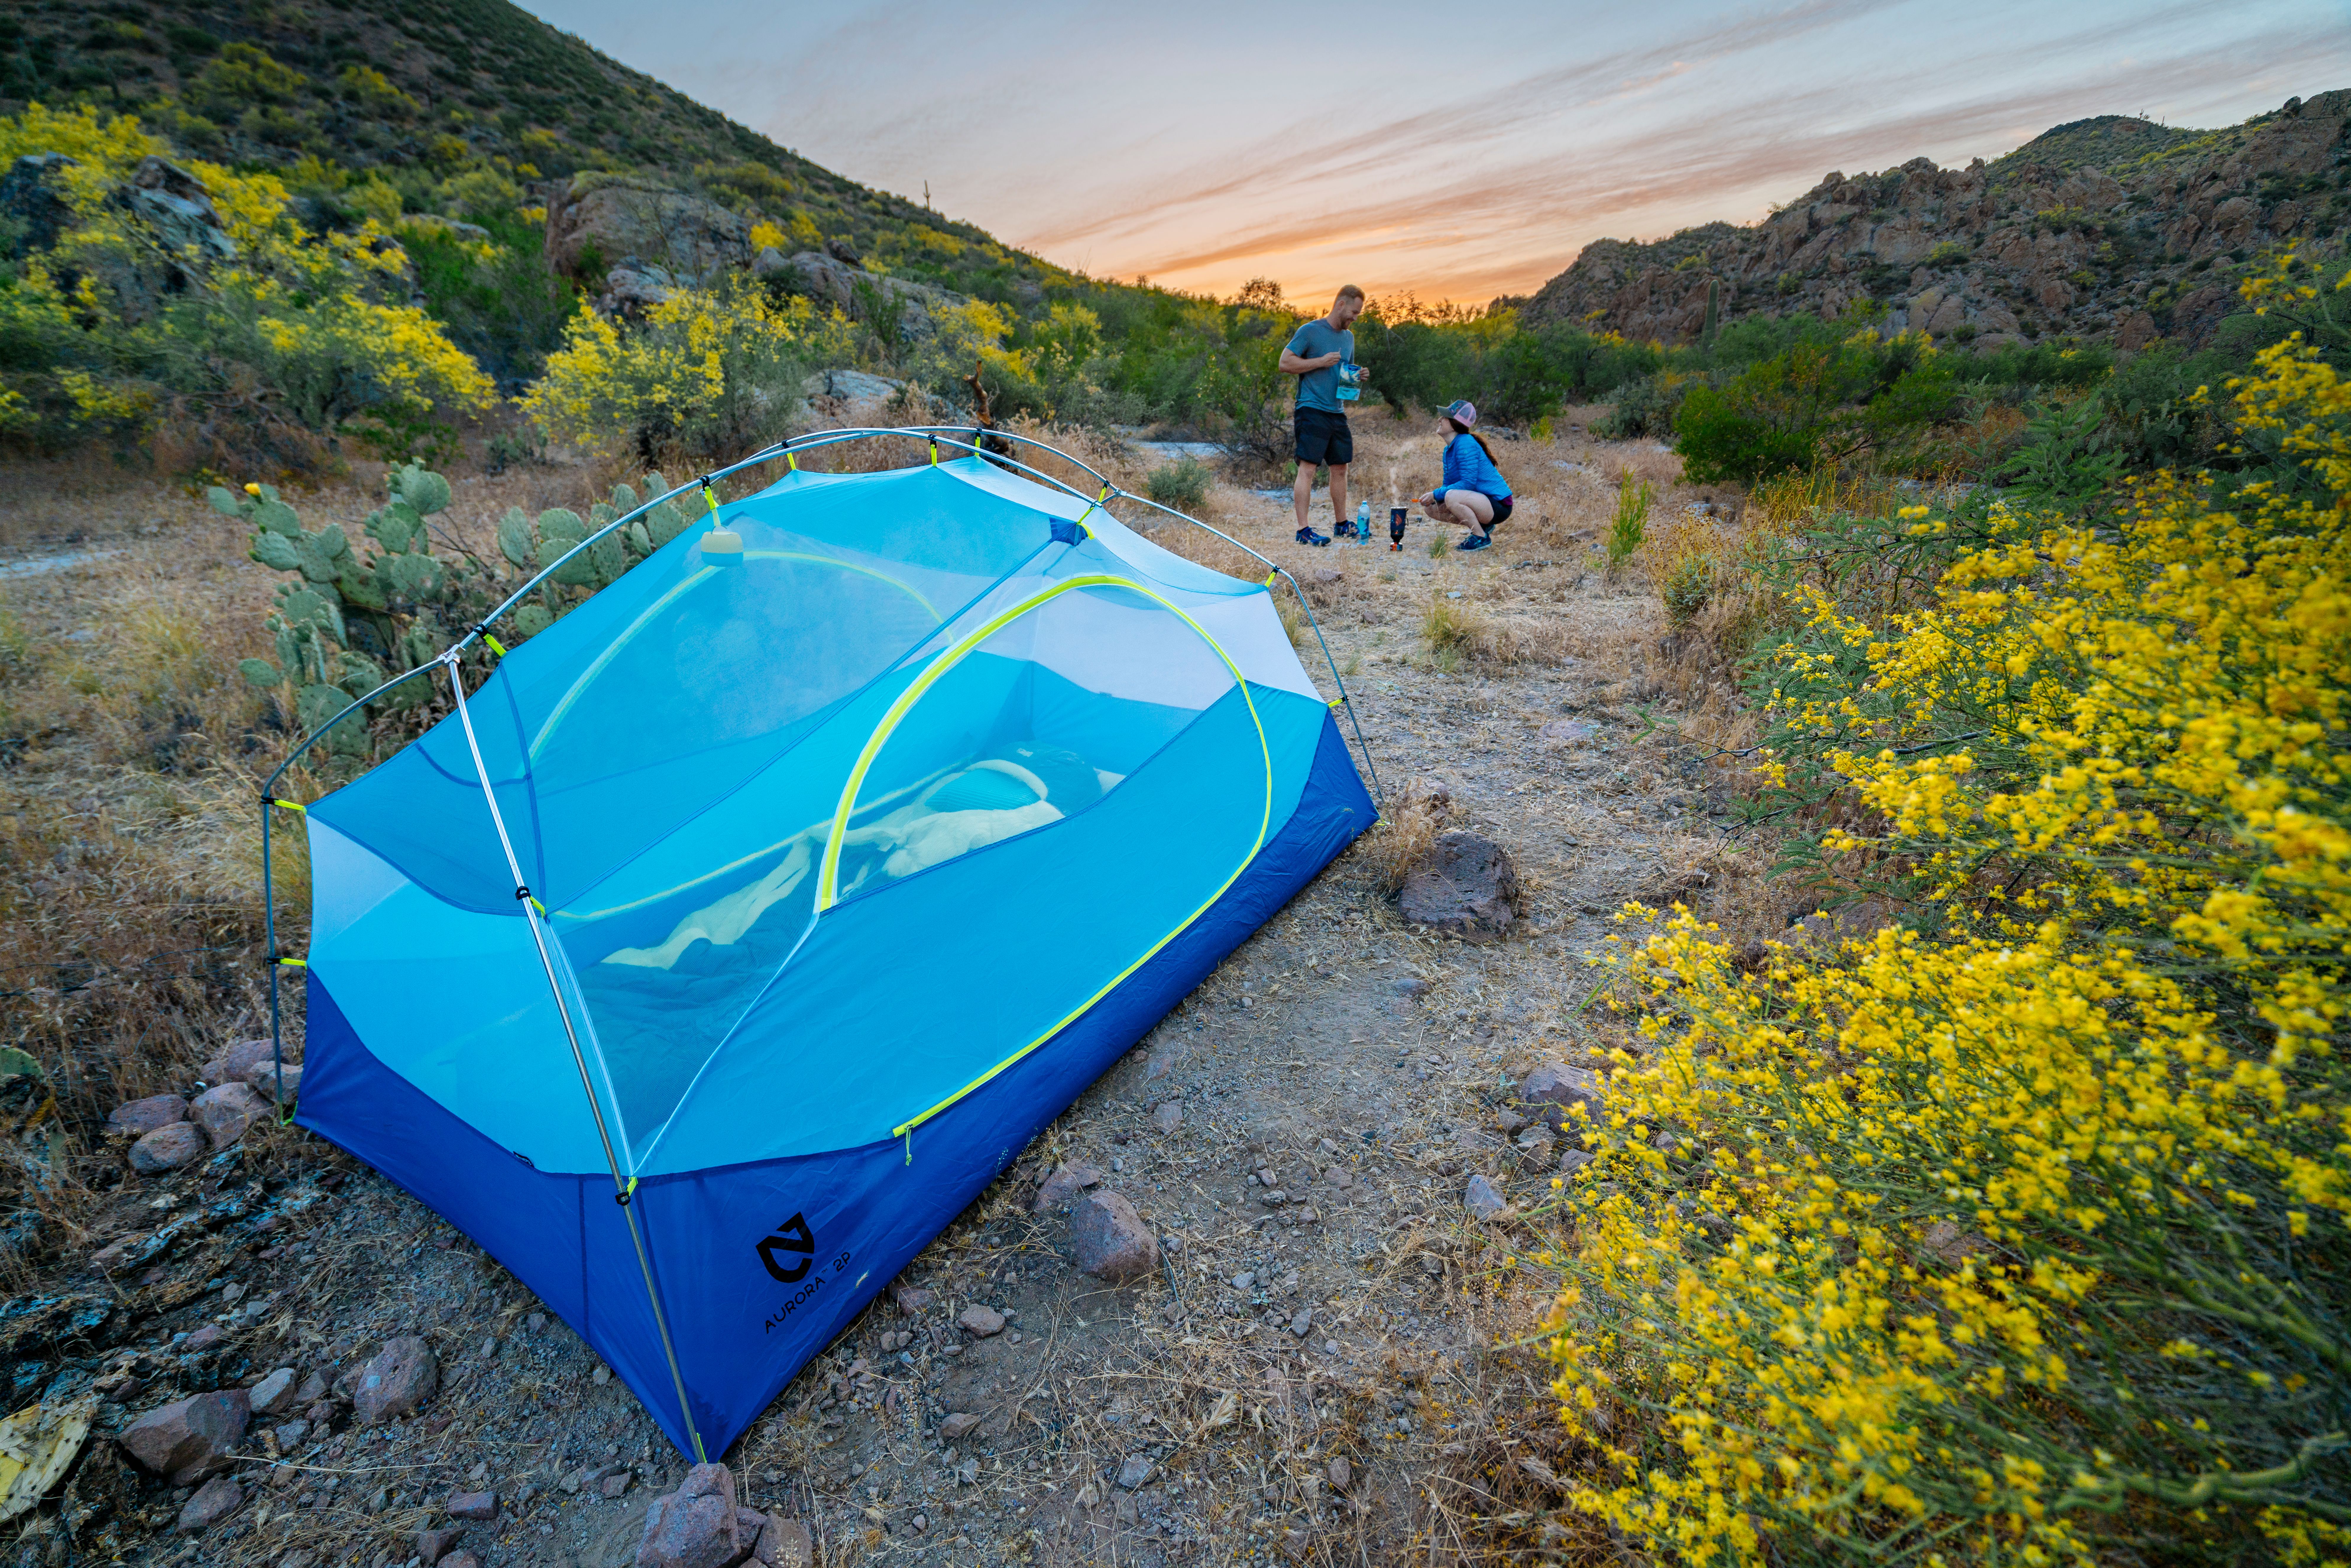 Nemo Switch Multi-Configuration Camping Tent & Shelter